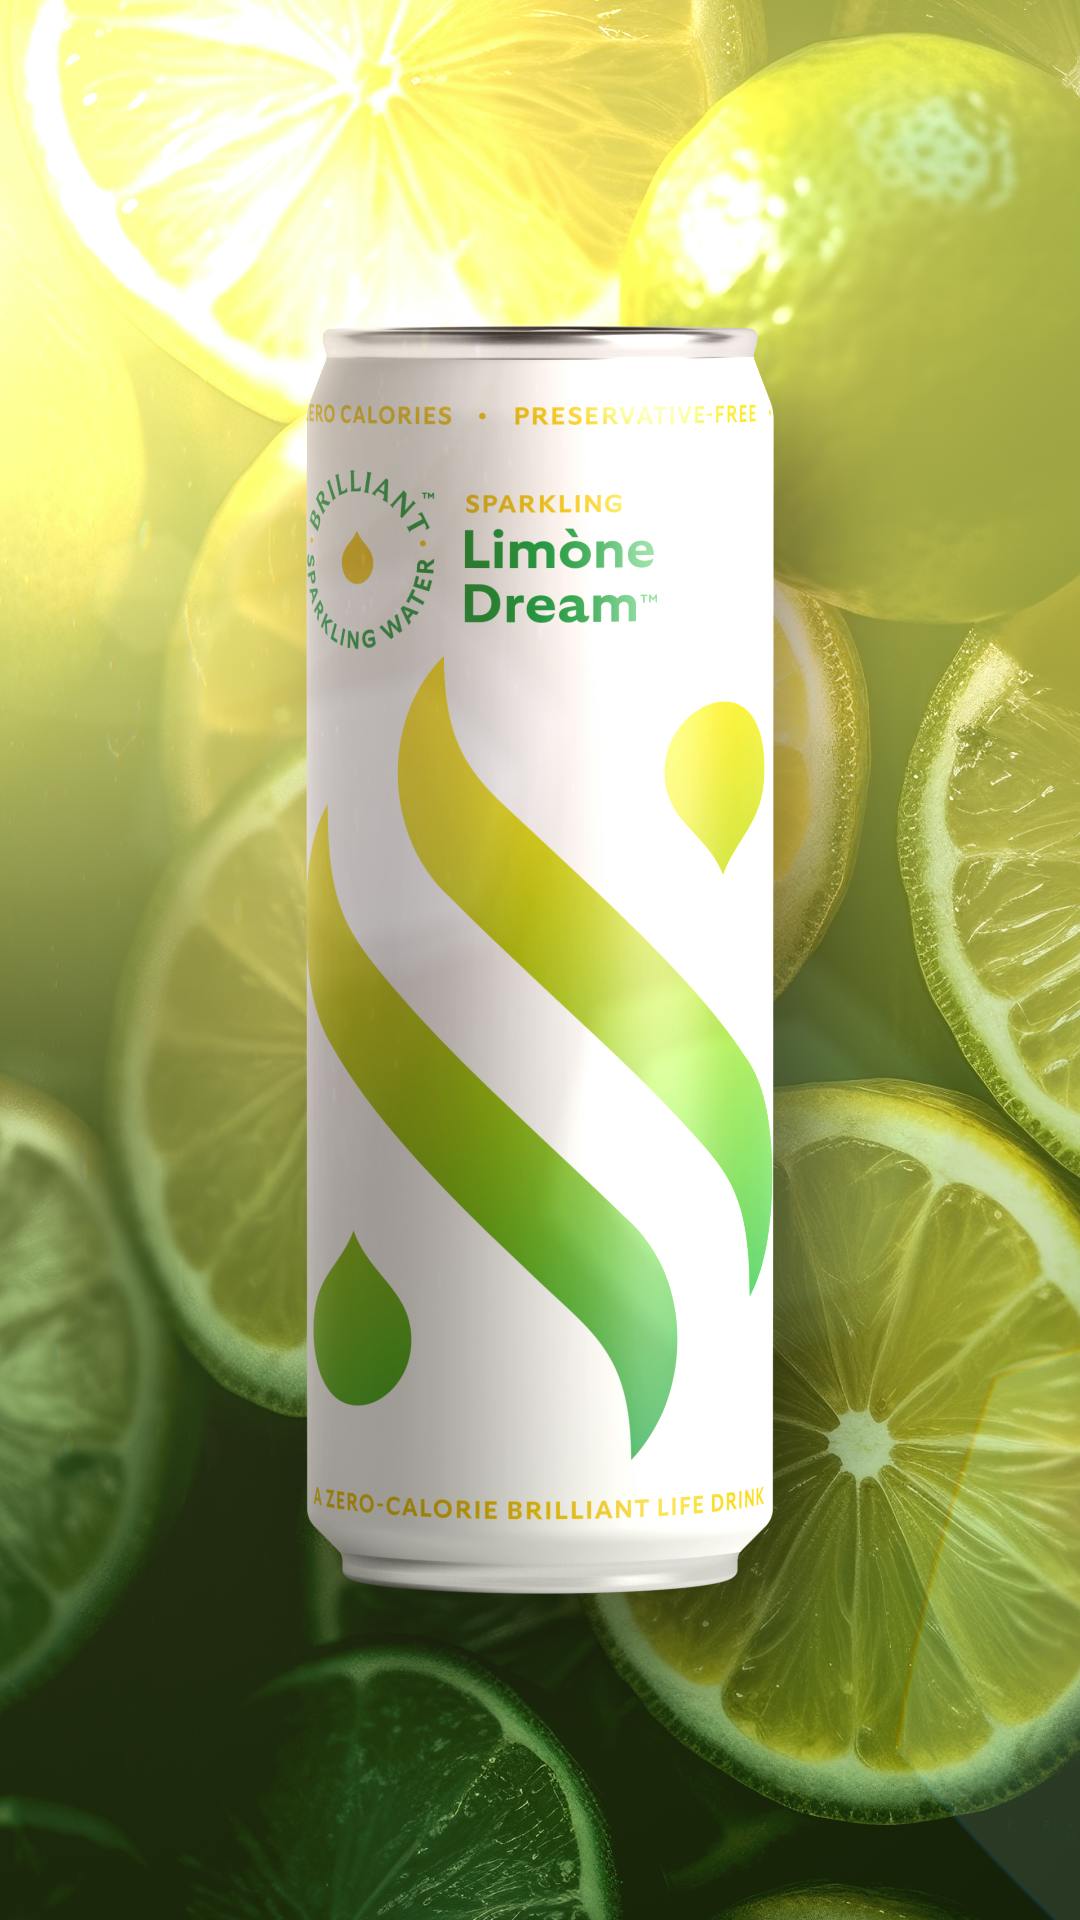 A lime themed softdrink ad